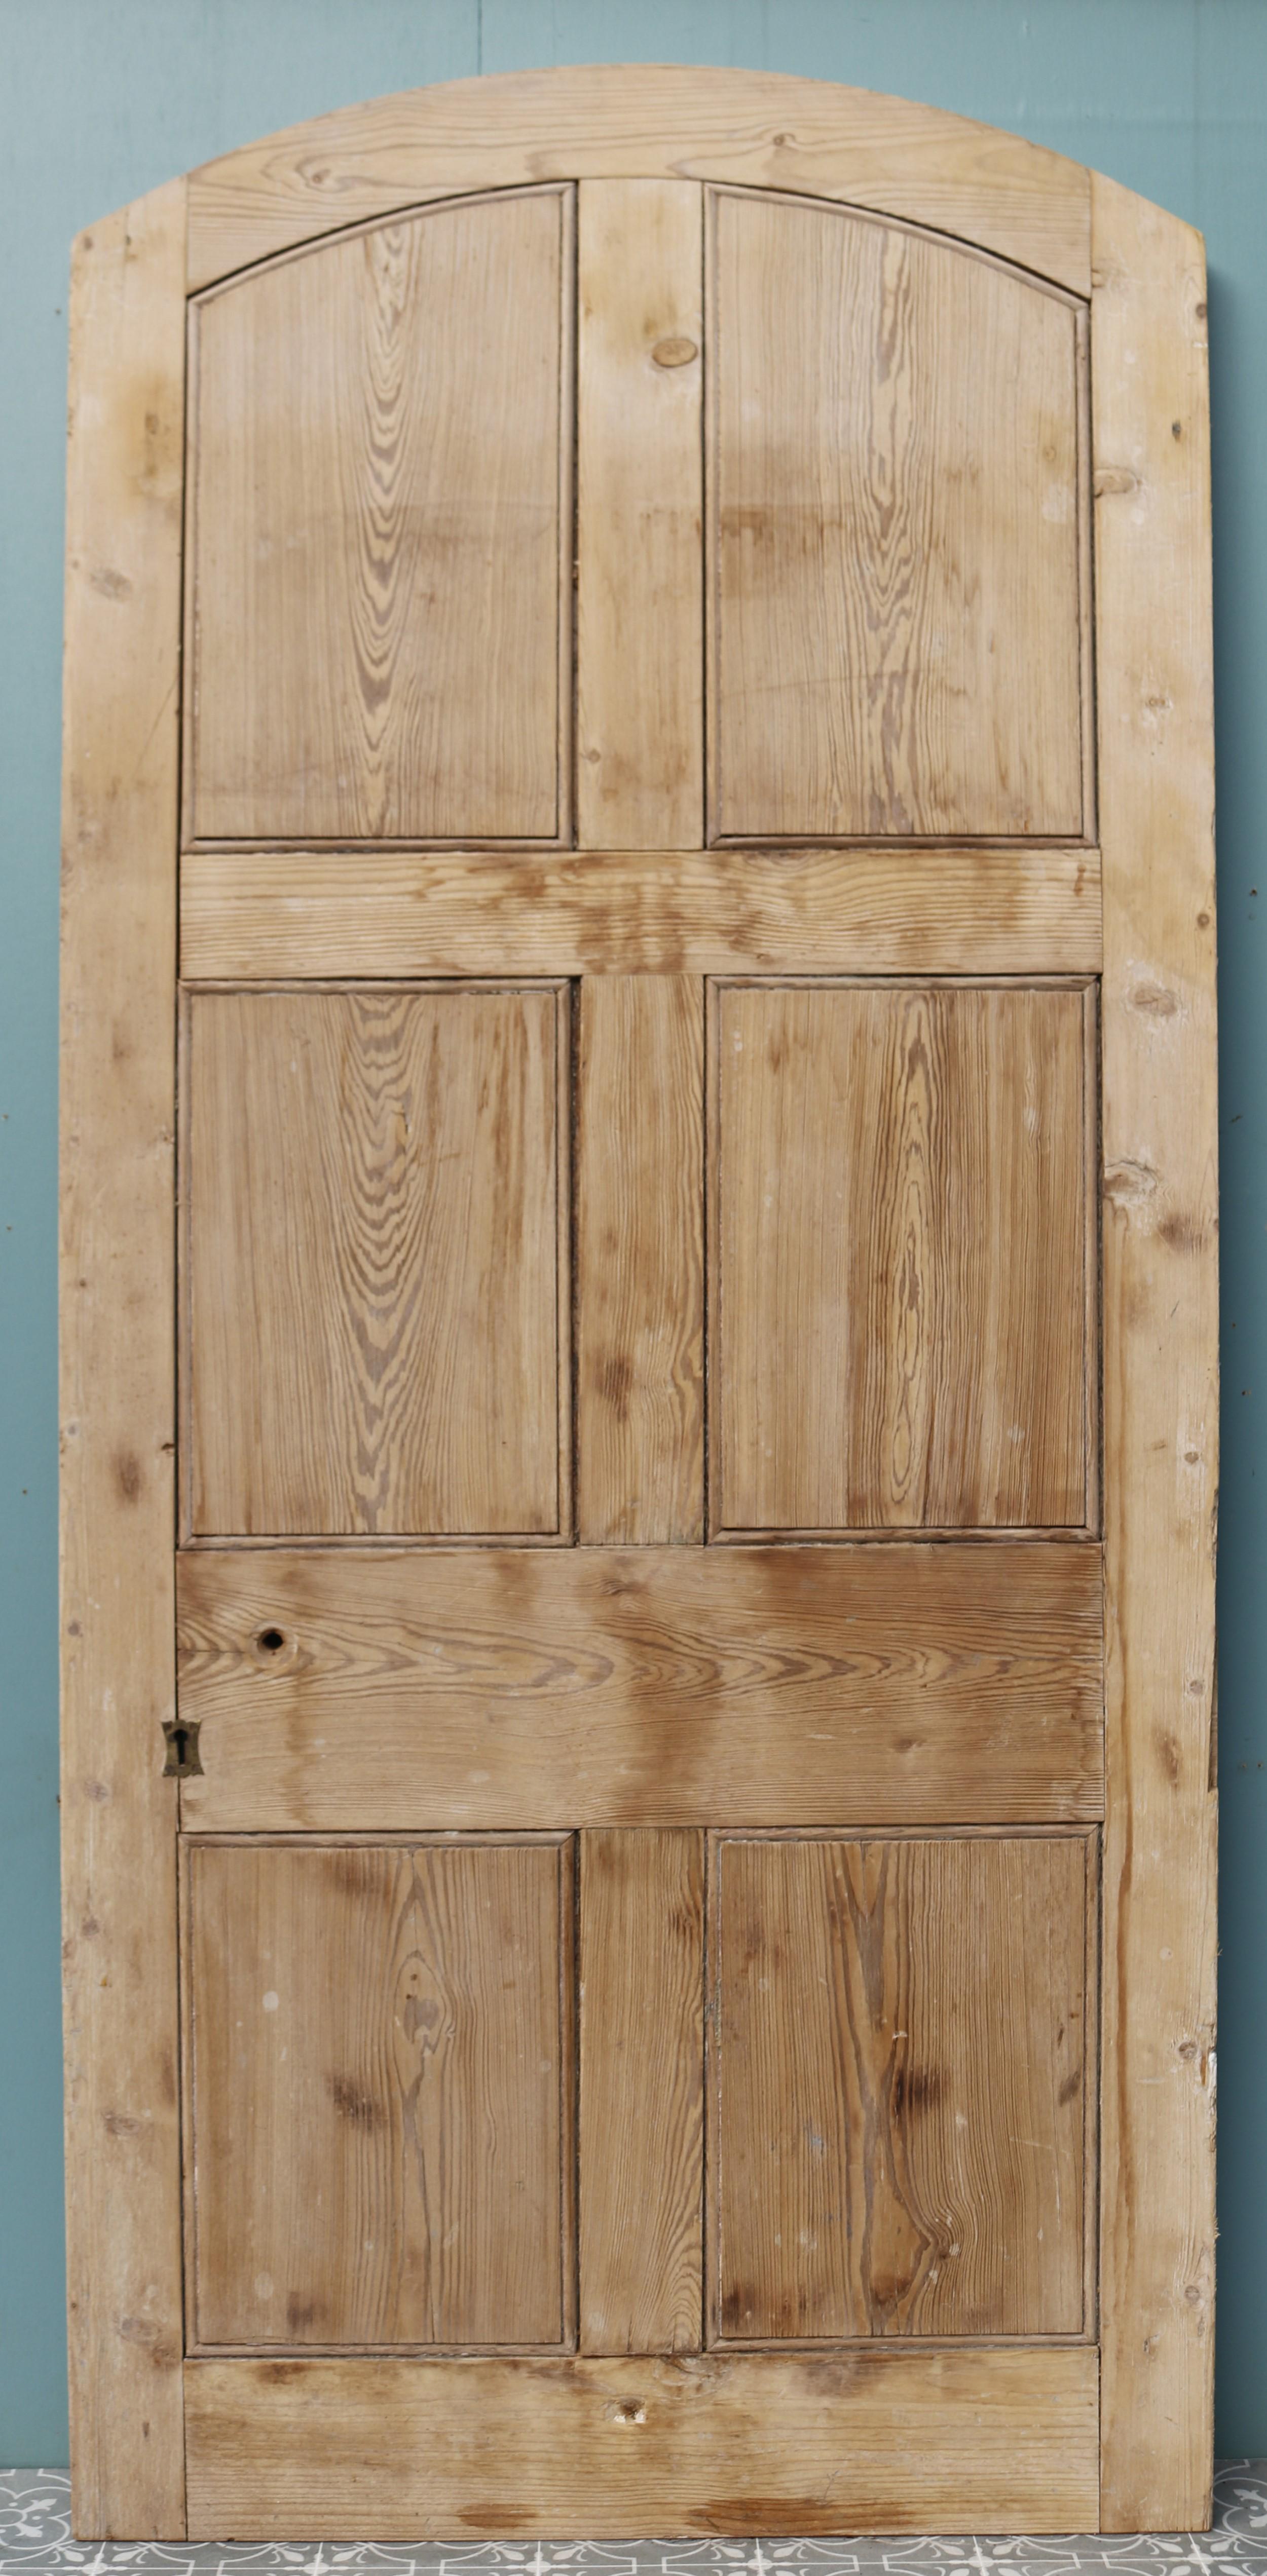 A 19th century reclaimed arched pine door which is suitable for use as a front door.